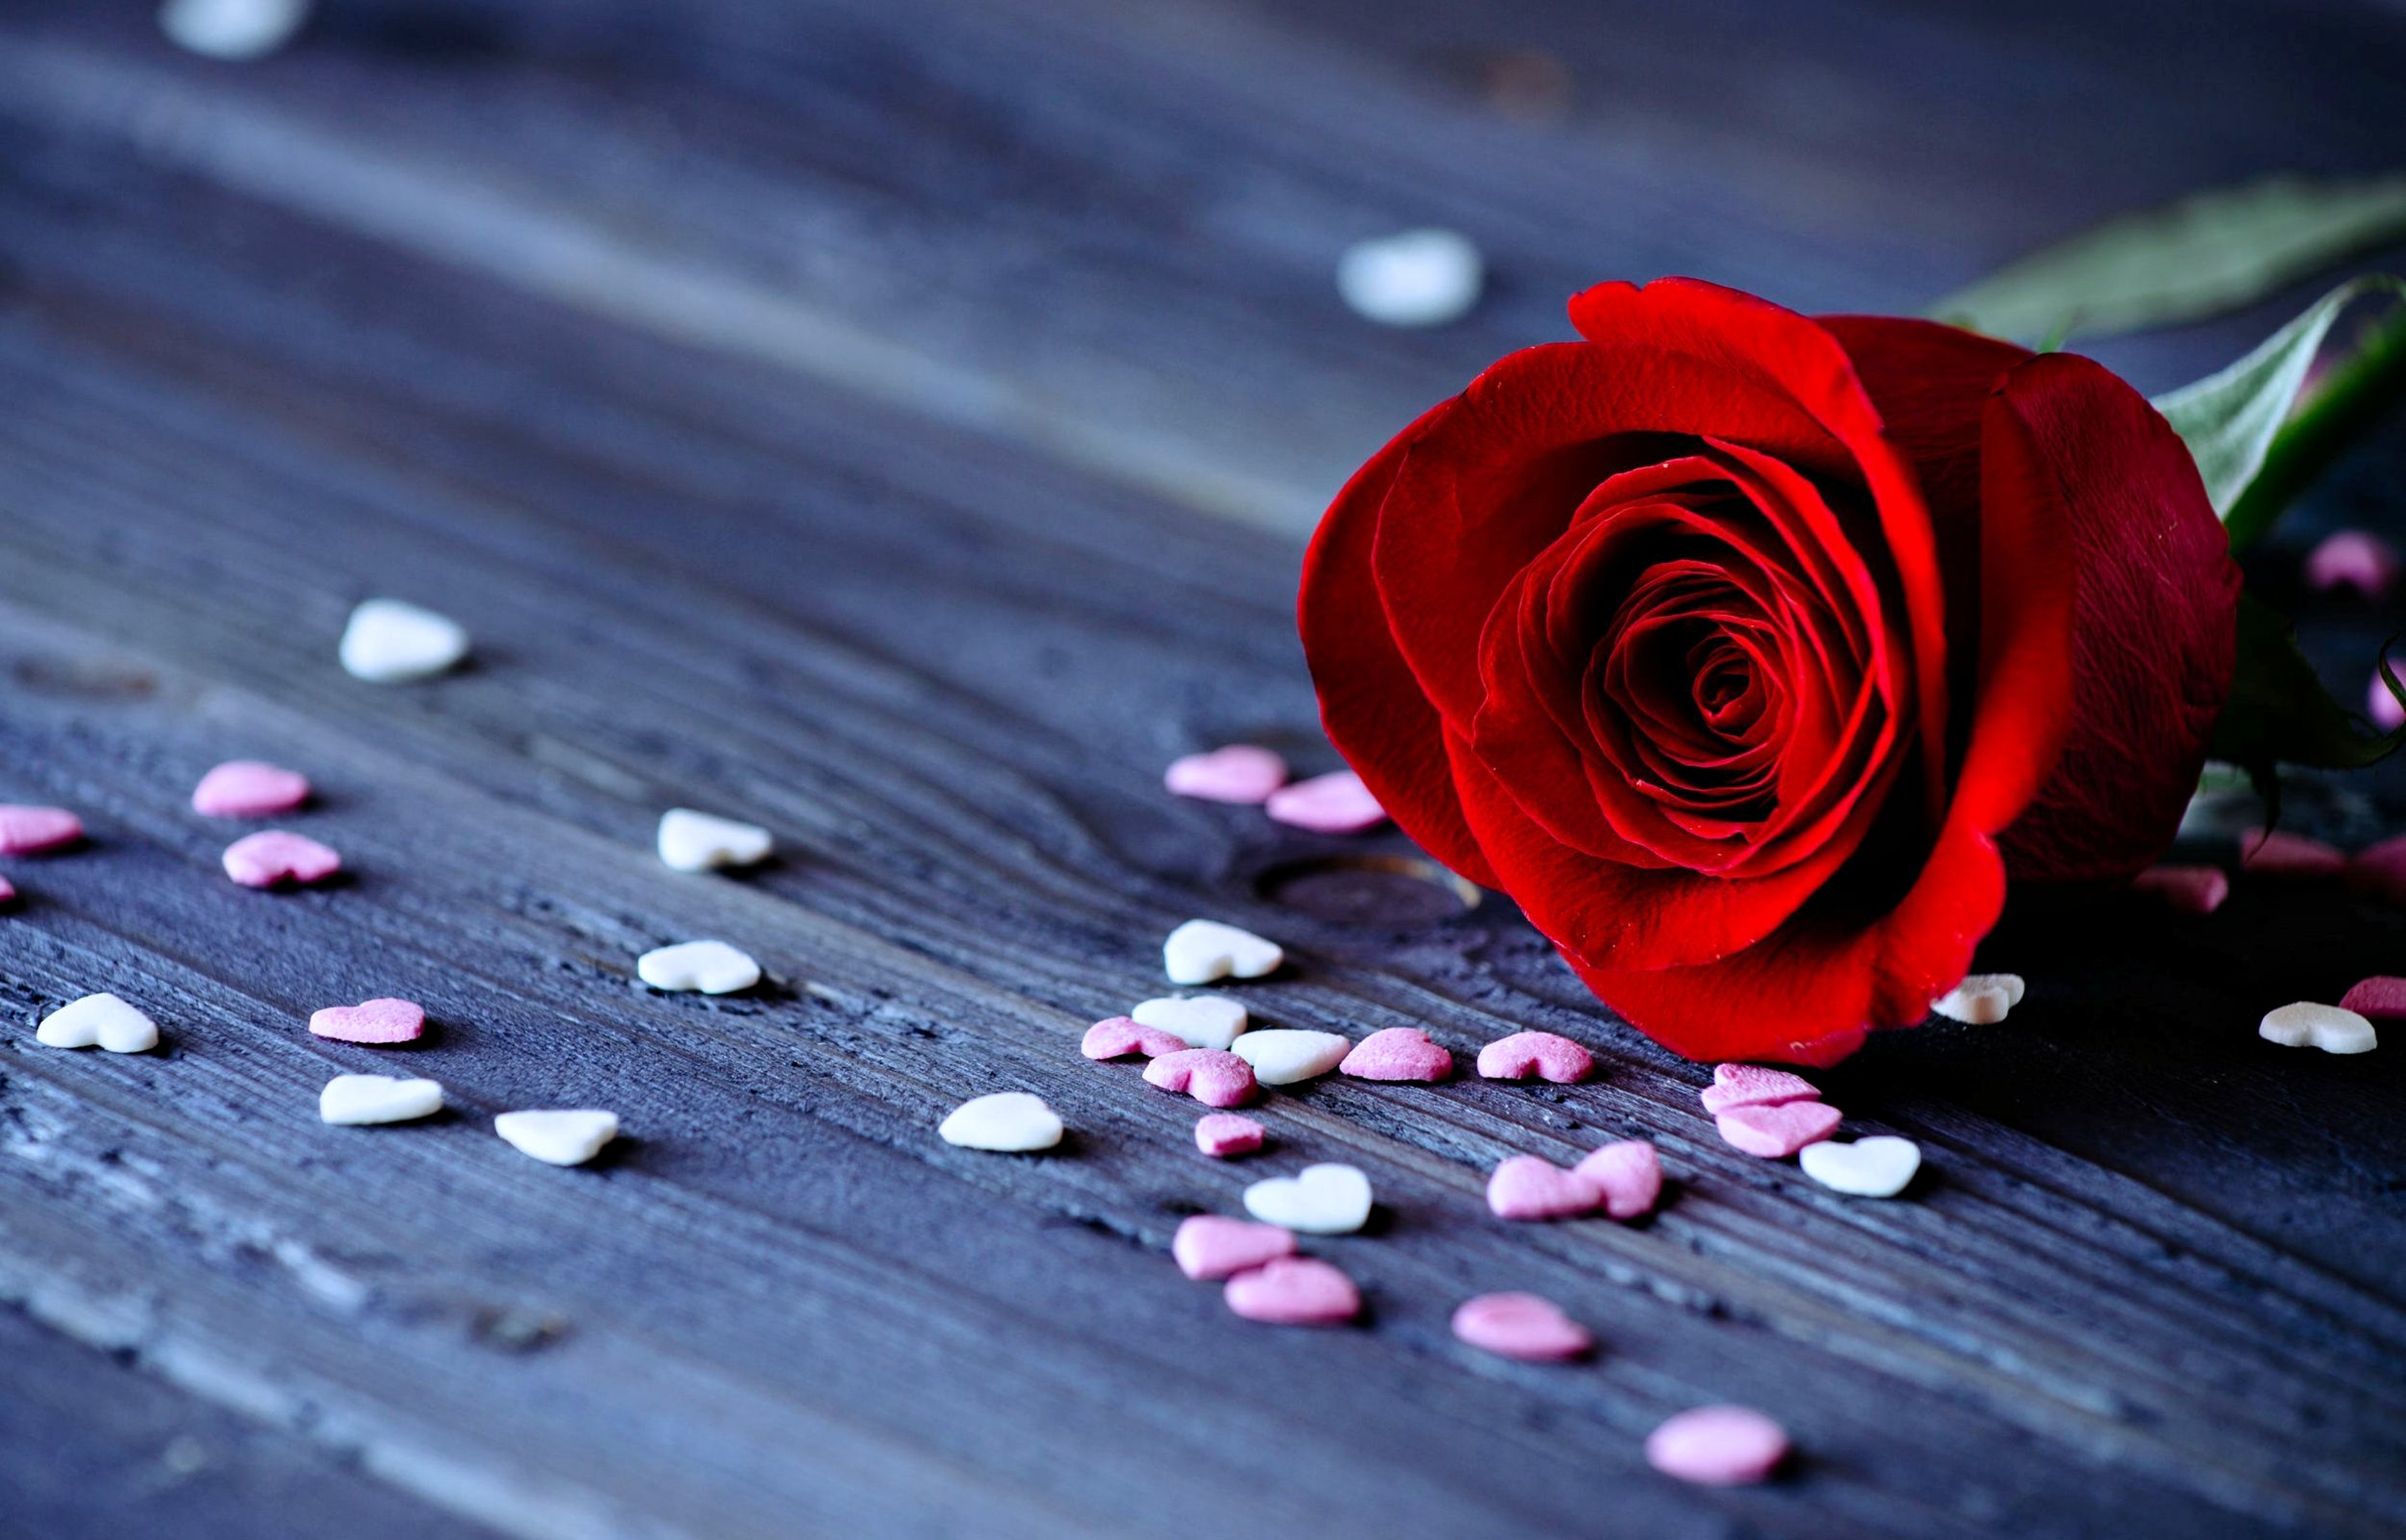 roses, Flowers, Love, Romance, Red, Hearts, Emotions, For, Girls, Lovers Wallpaper